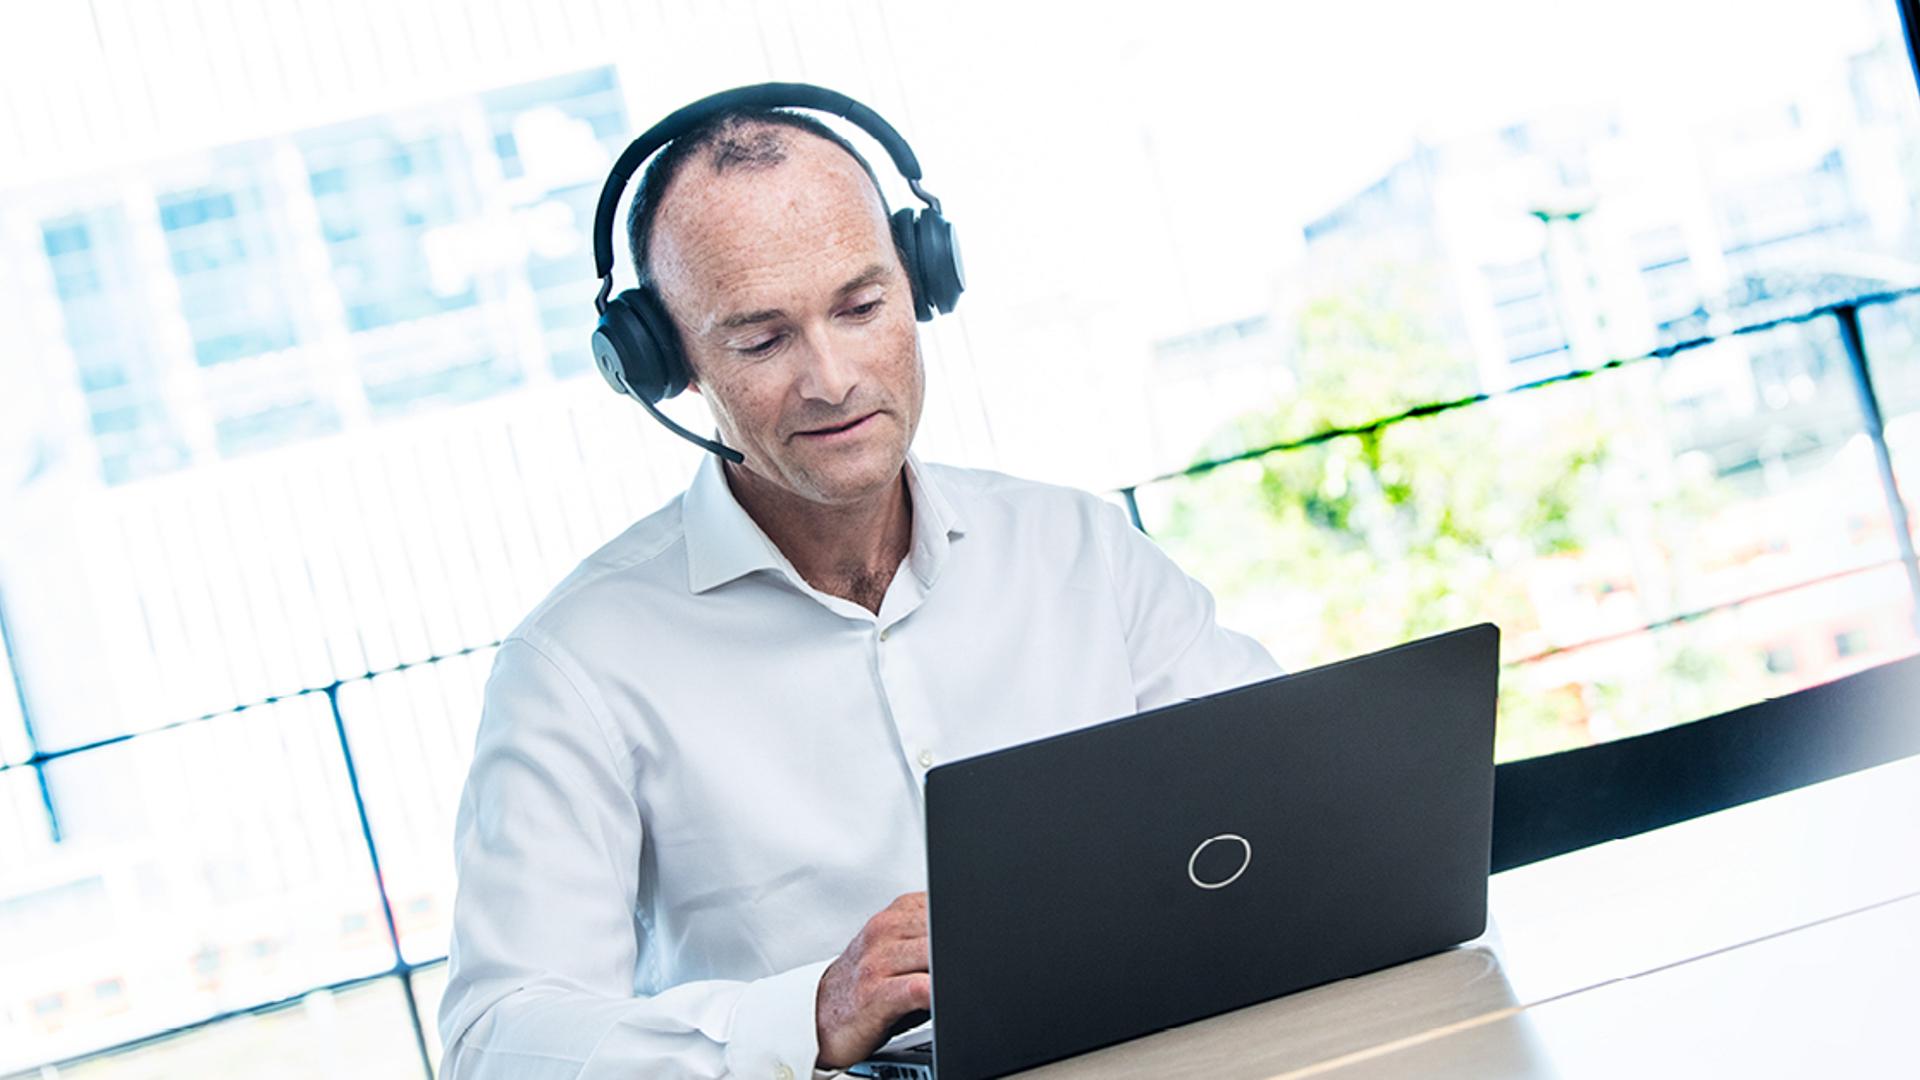 An EPO examiner with a headset using a computer